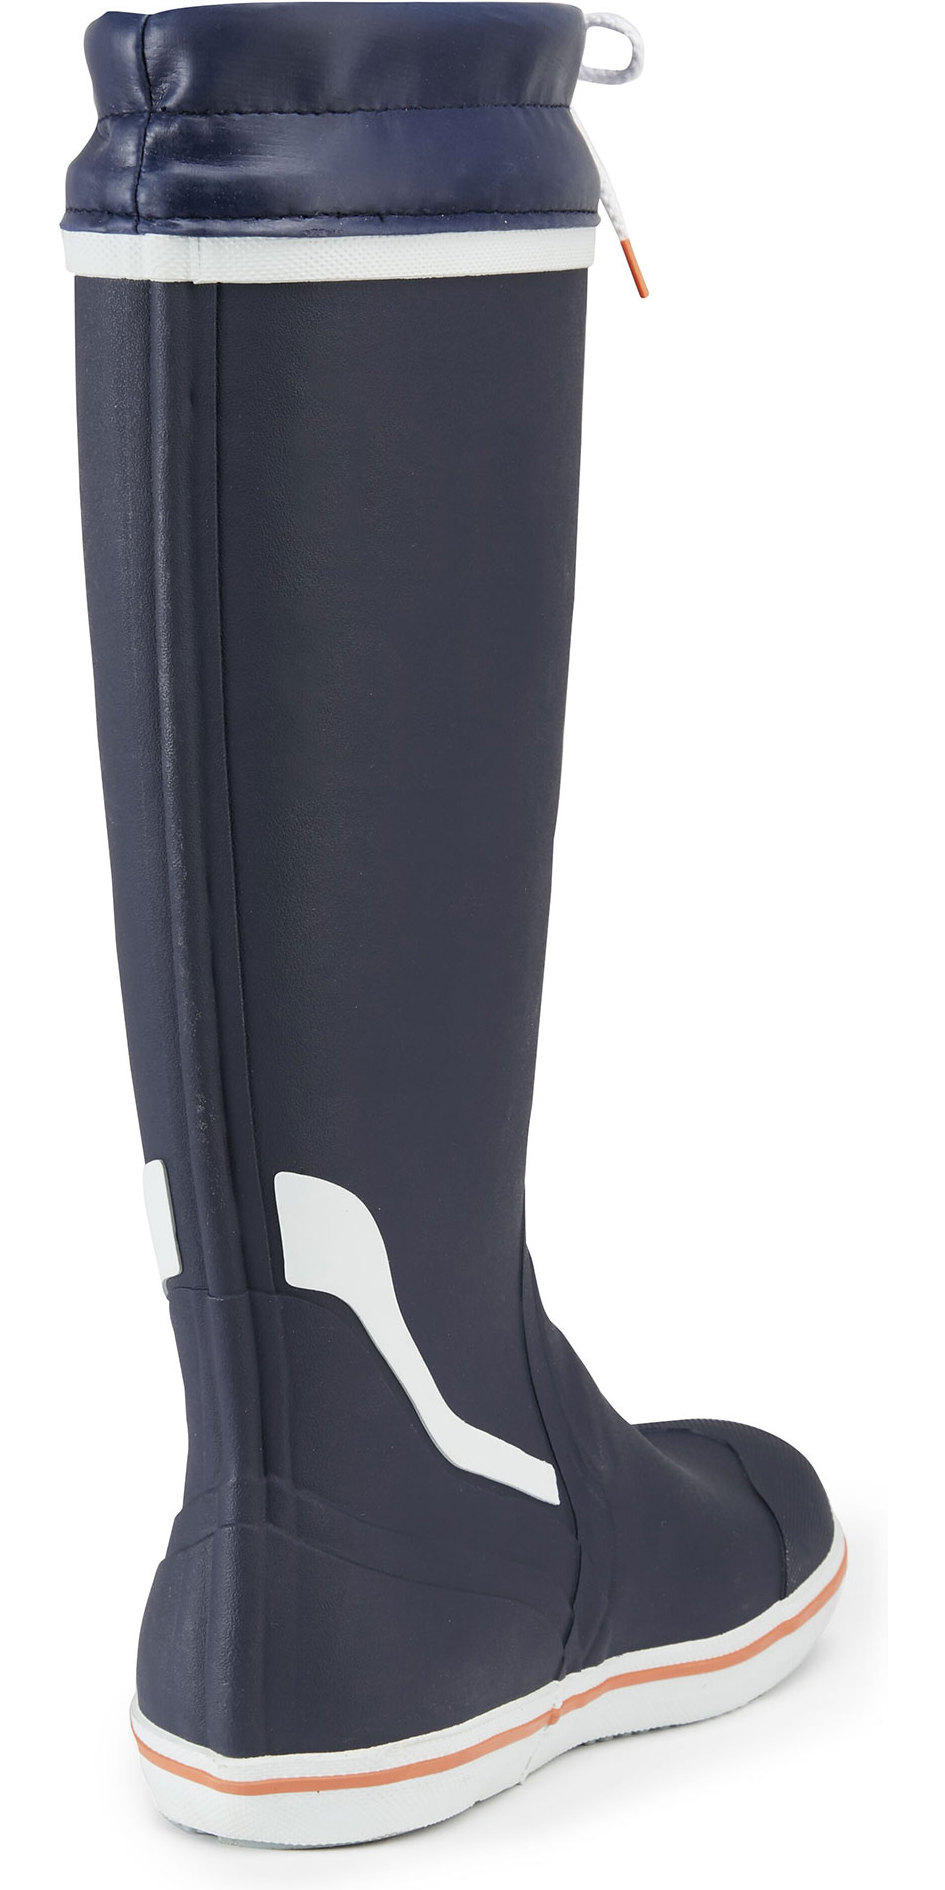 2019 Gill Tall Yachting Boots Blue 909 